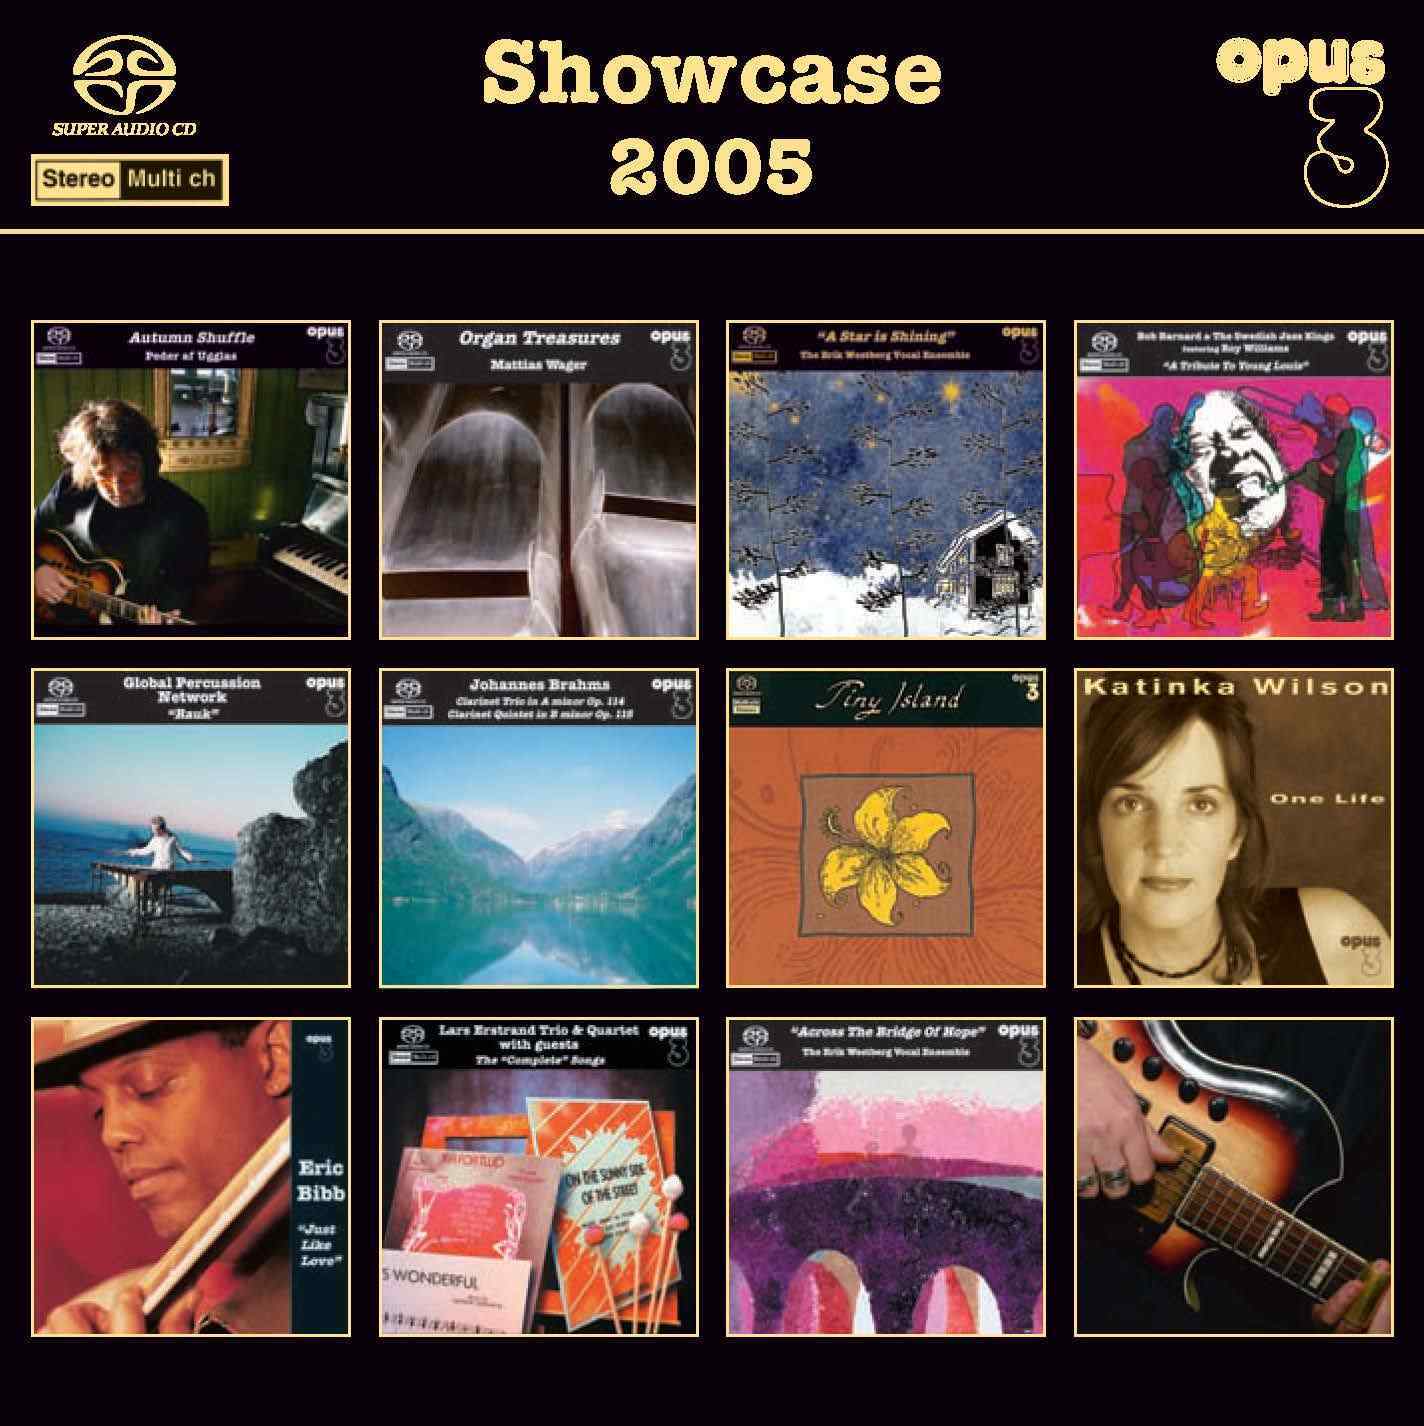 Various Artists – Opus 3: Showcase 2005 (2005) MCH SACD ISO + DSF DSD64 + Hi-Res FLAC